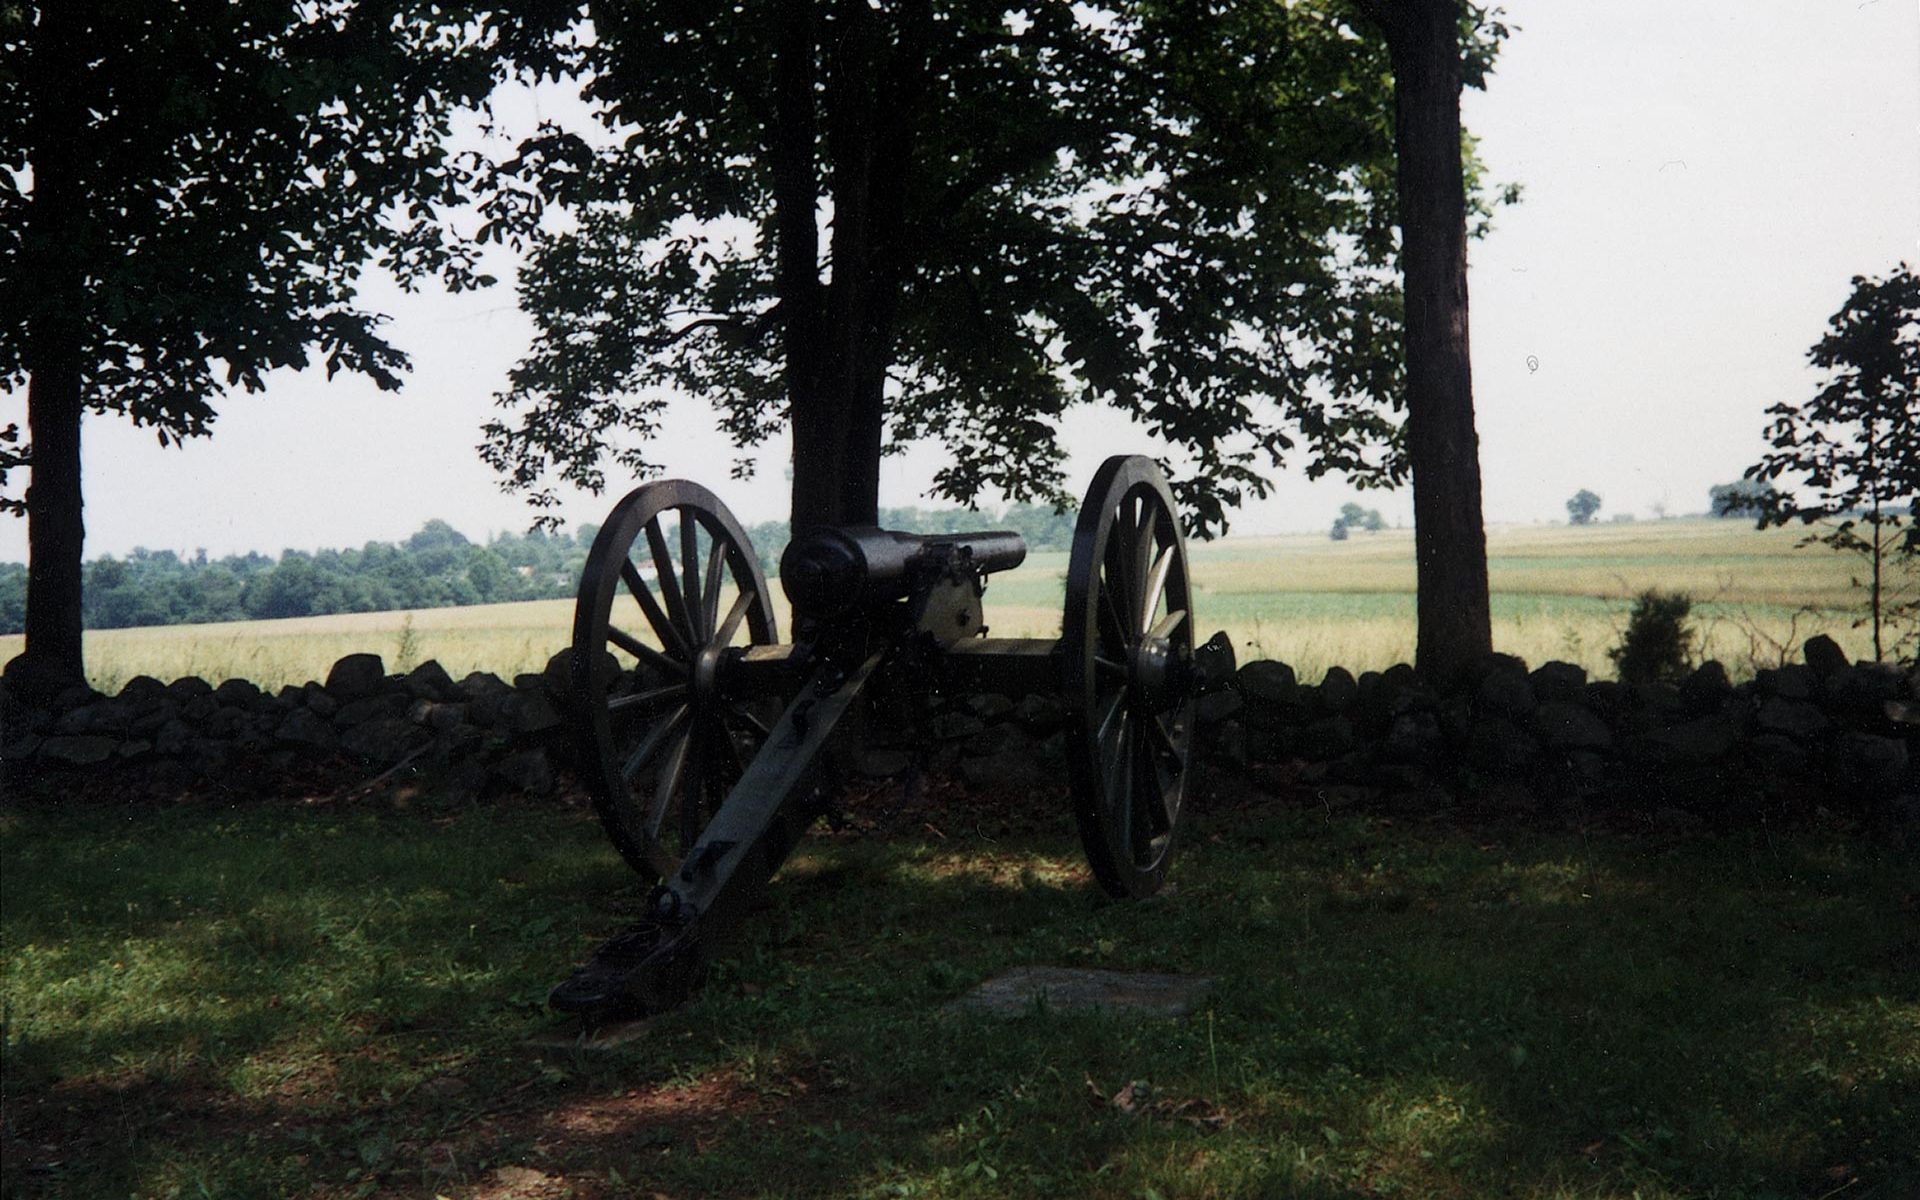 Cannon in Gettysburg National Military Park